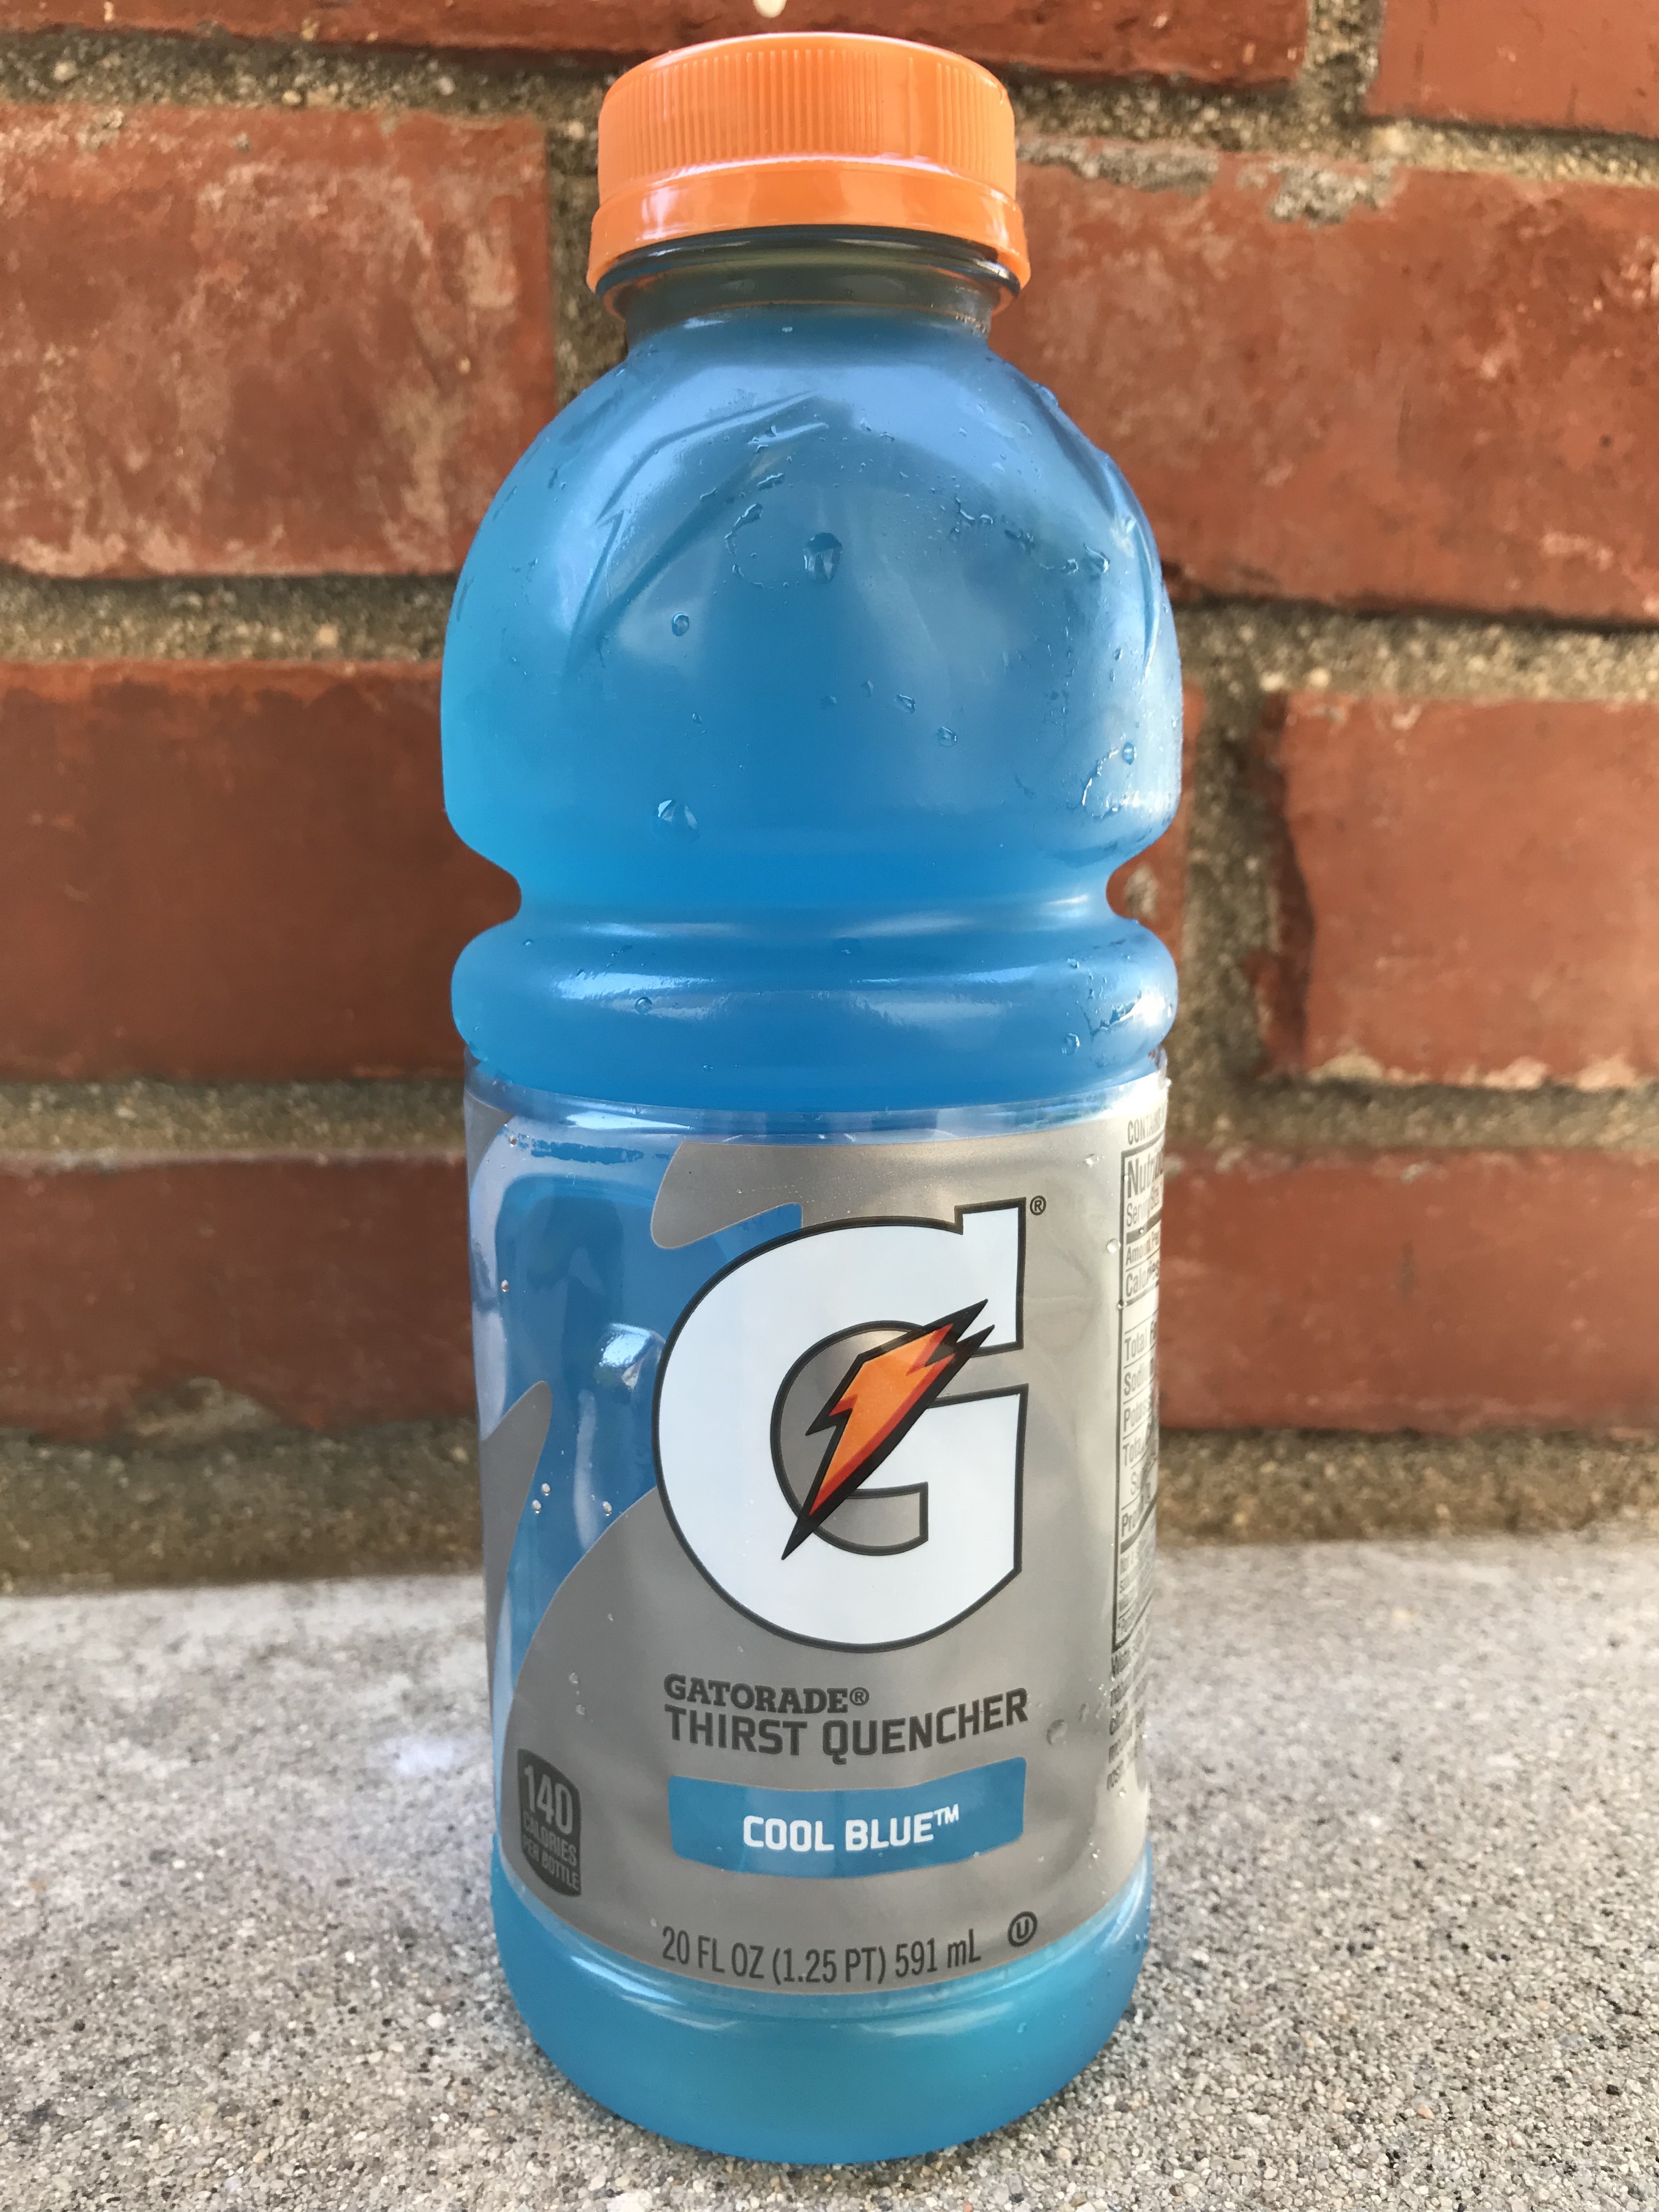 The Best Gatorade Flavors, Ranked And Reviewed By When You Need It The